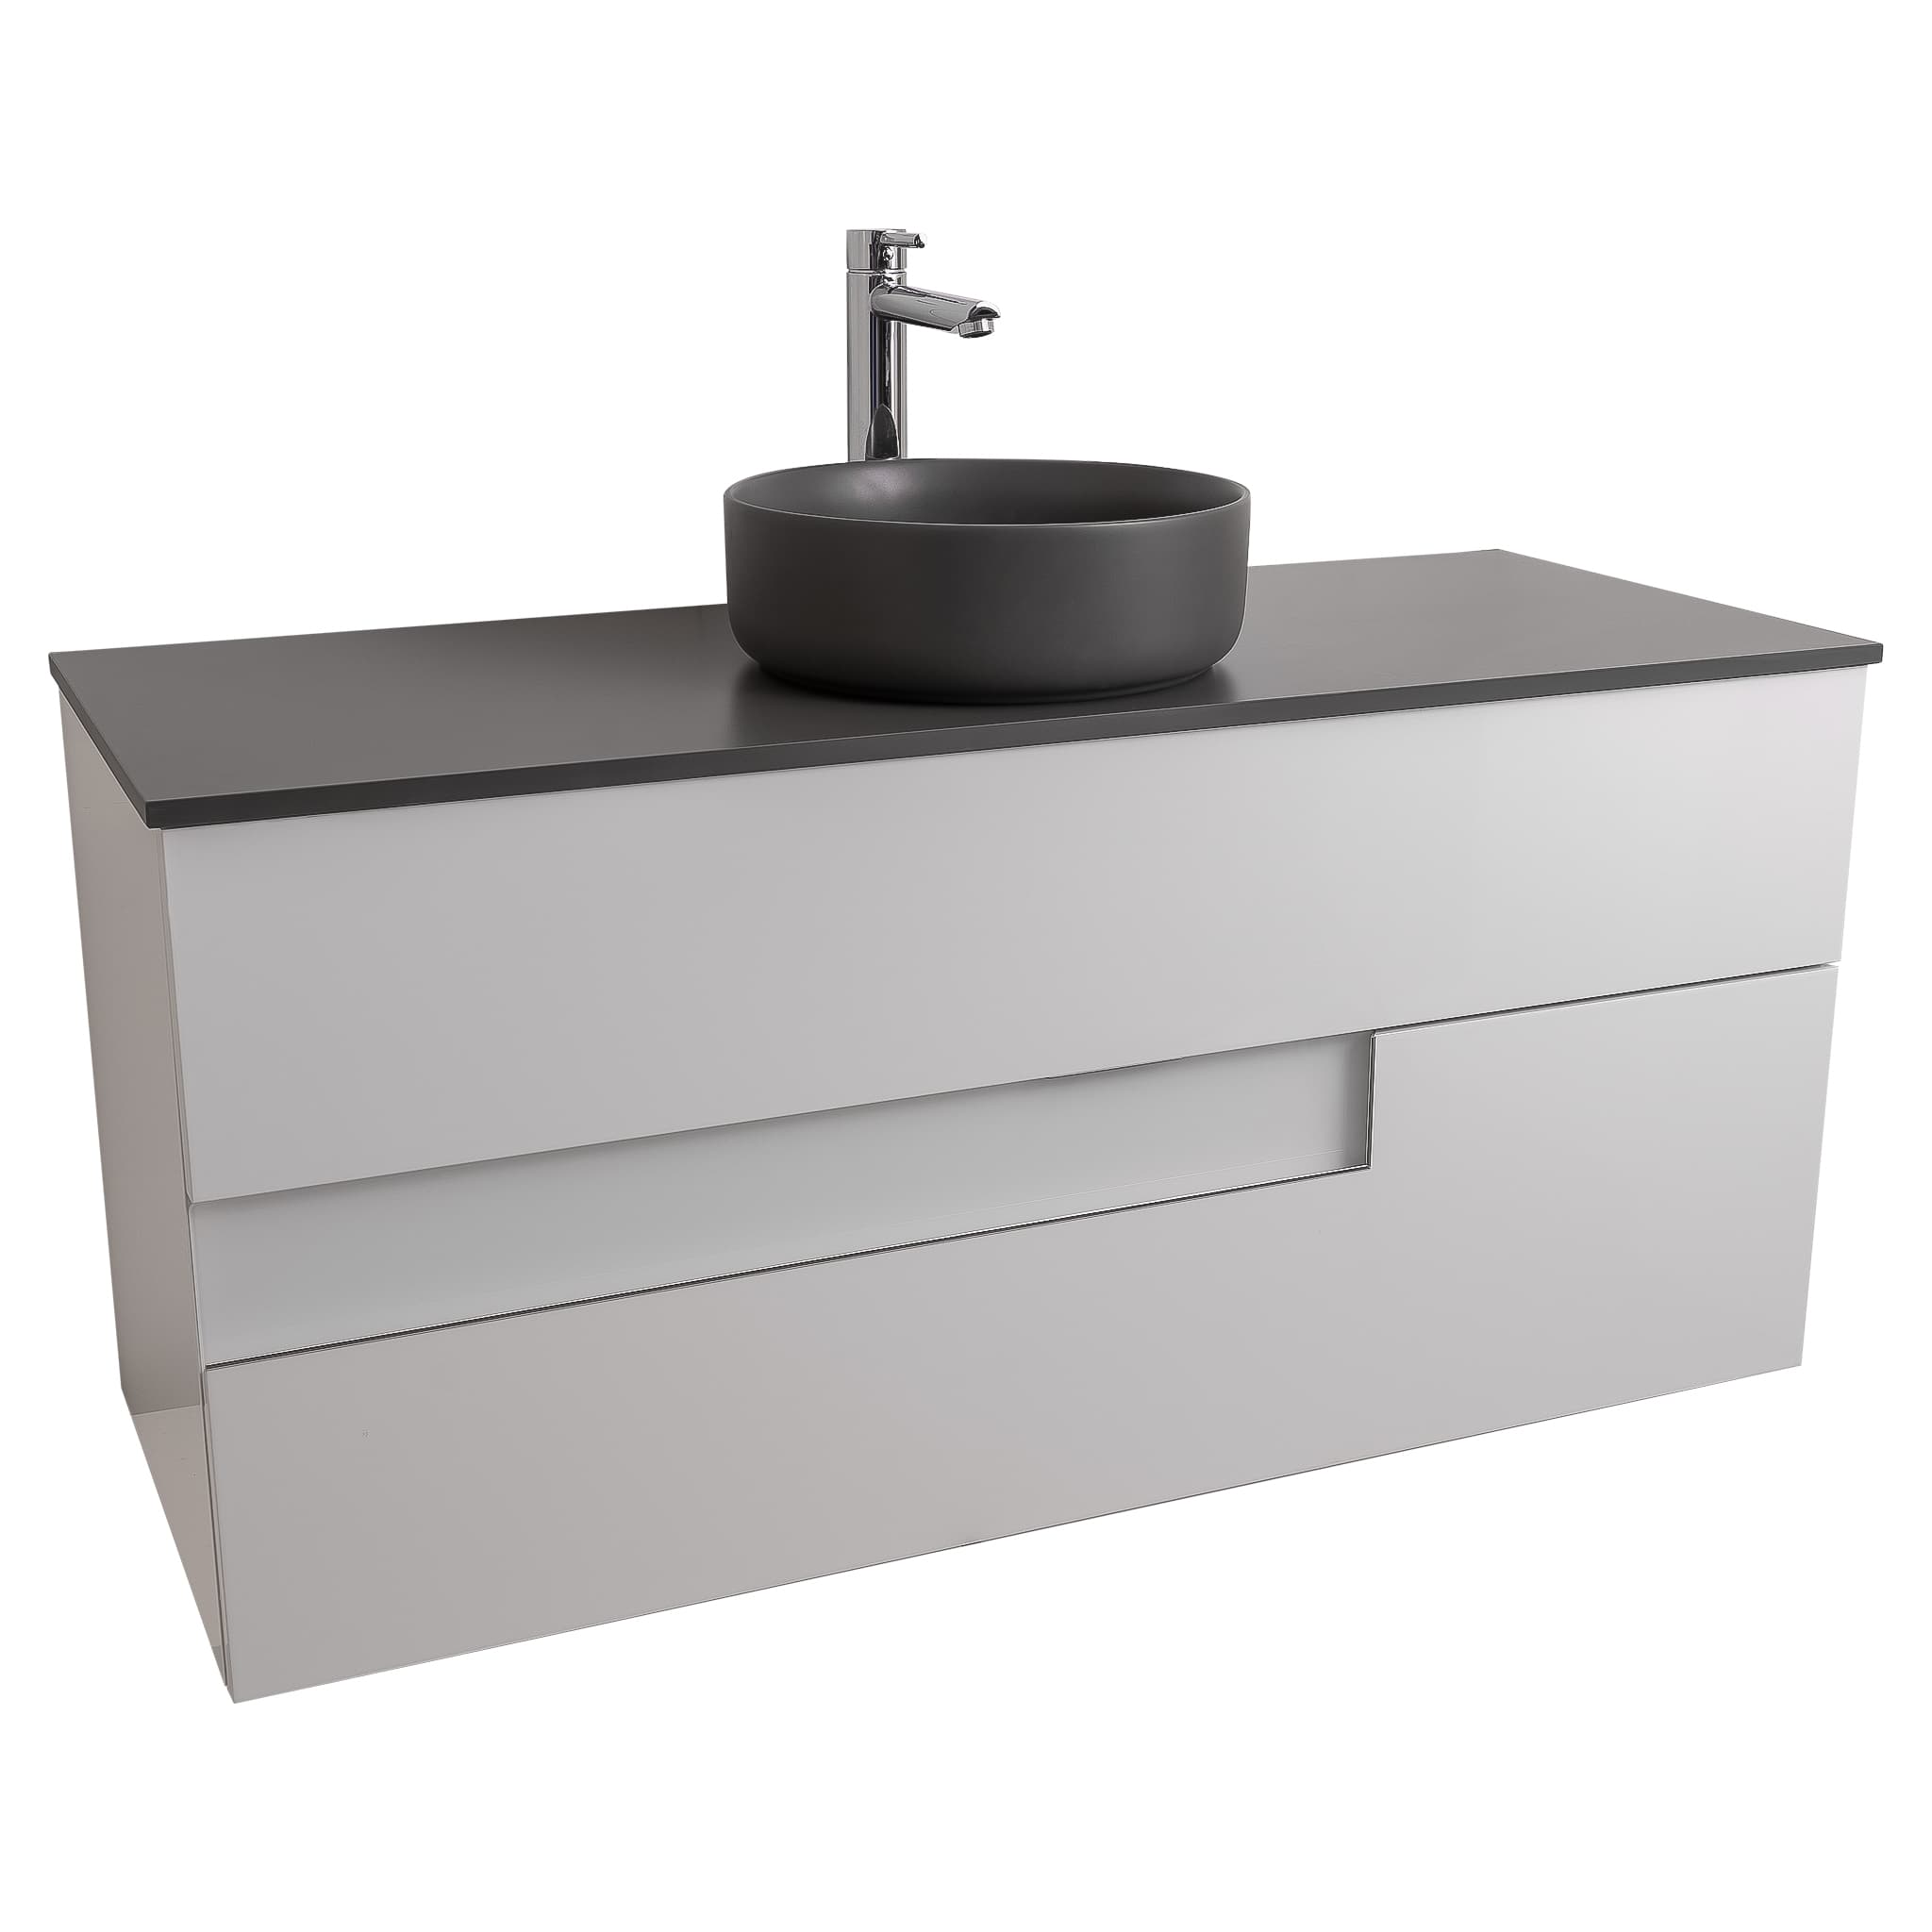 Vision 47.5 White High Gloss Cabinet, Ares Grey Ceniza Top And Ares Grey Ceniza Ceramic Basin, Wall Mounted Modern Vanity Set